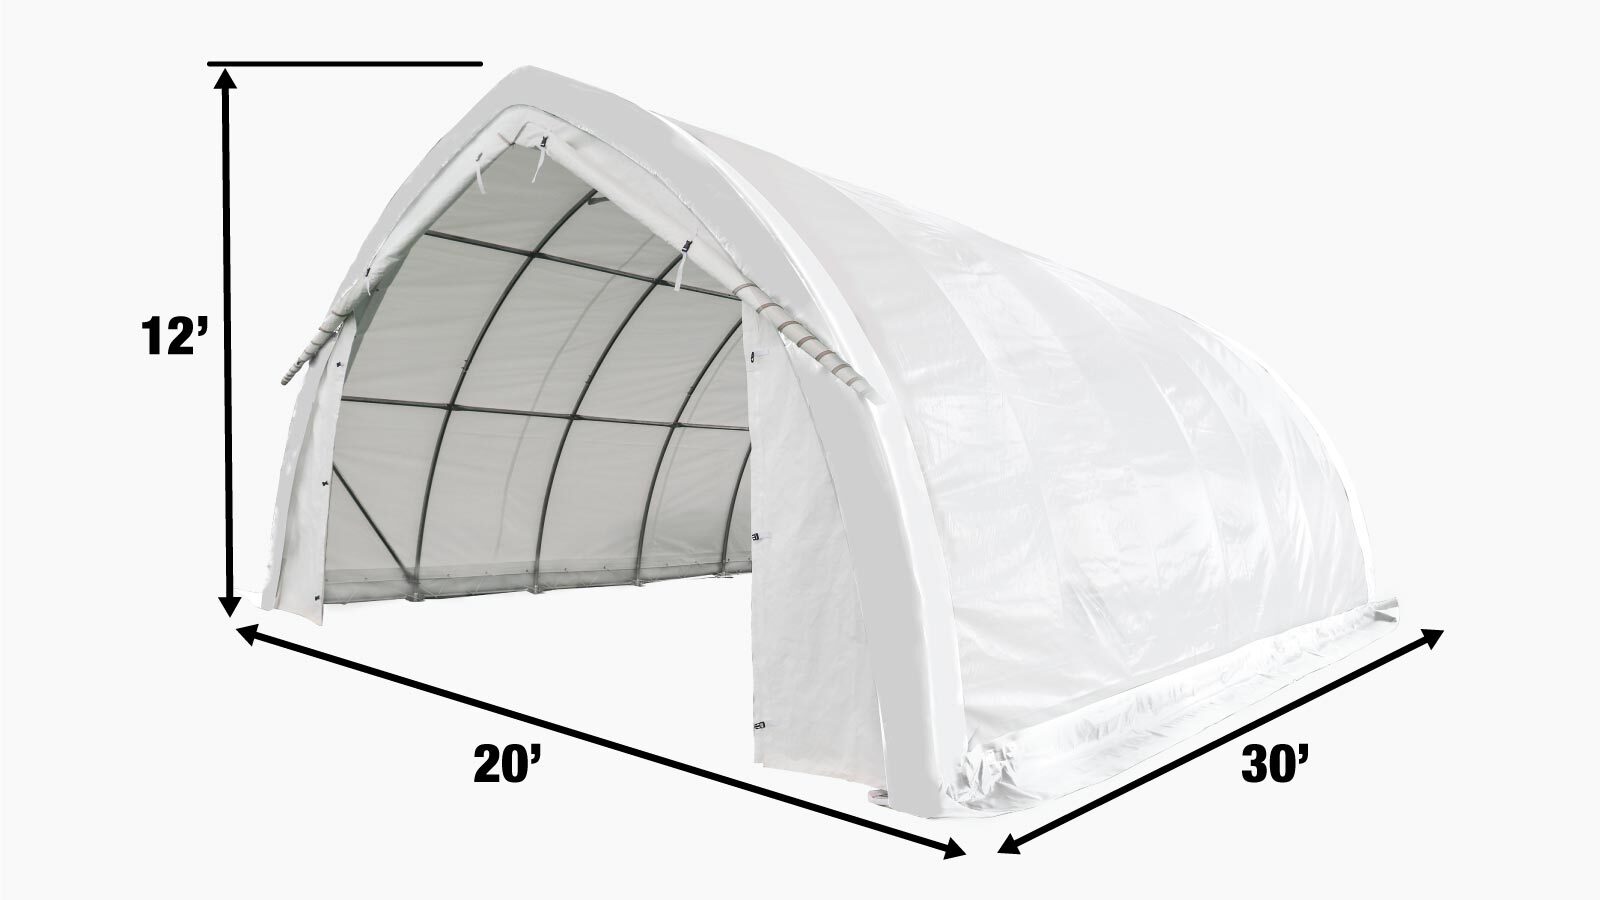 TMG Industrial 20' x 30' Arch Wall Peak Ceiling Storage Shelter with Heavy Duty 17 oz PVC Cover & Drive Through Doors, TMG-ST2031PV(Previously ST2030PV)-specifications-image